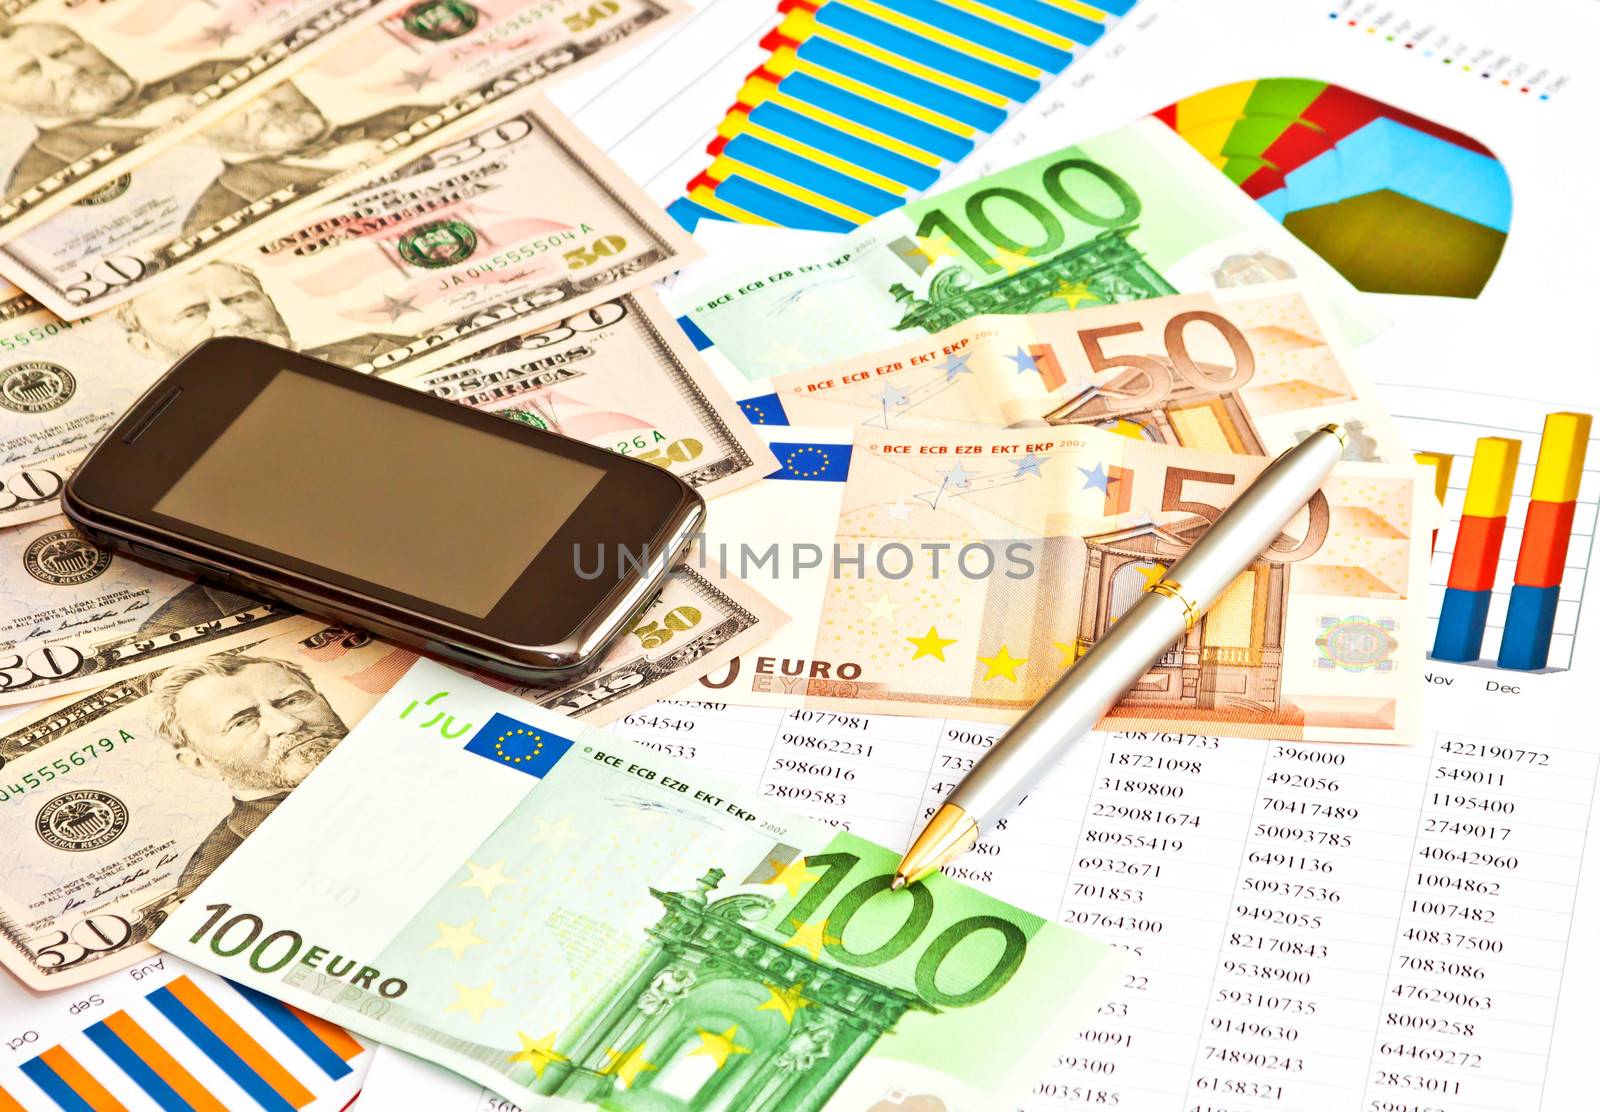 Money, financial graphs, phone and other business stuff
